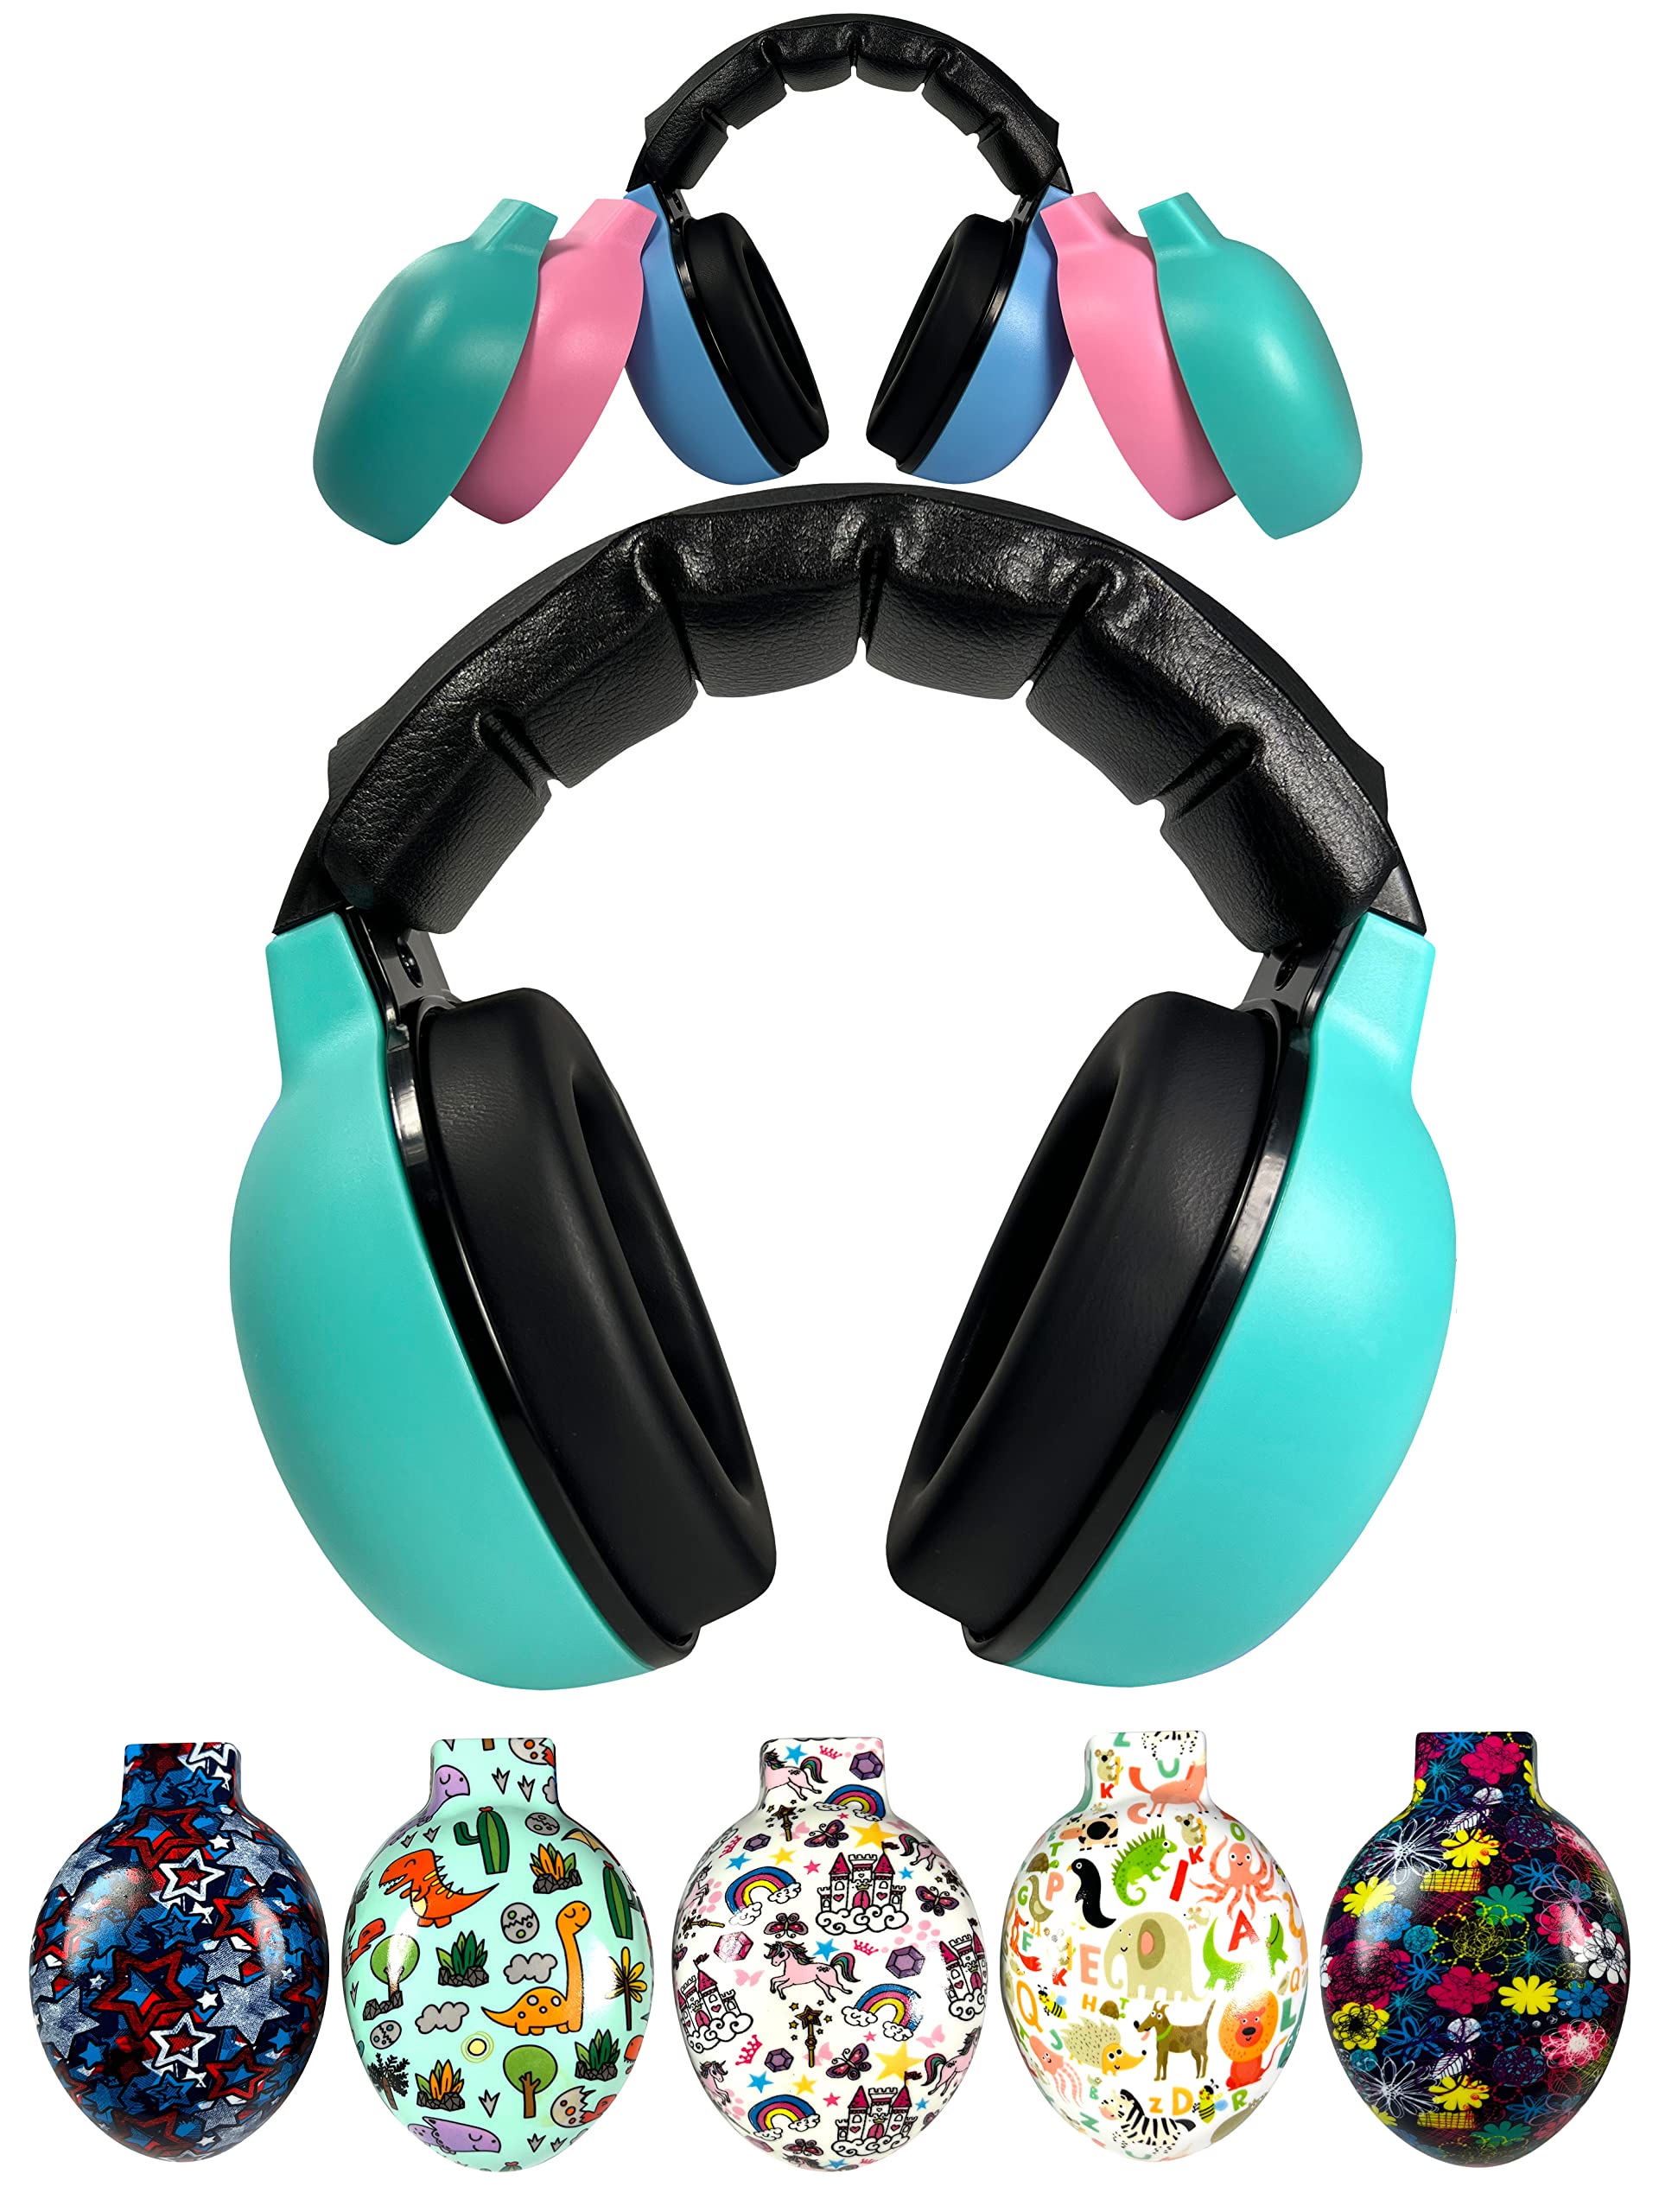 ZIPZ Baby & Toddler Earmuffs PLUS 1 Extra Set of Cars/Trucks Shells – Innovative Design – Change Colors with Magnetic Shells – Hearing Protection Headphones 0-4 yrs